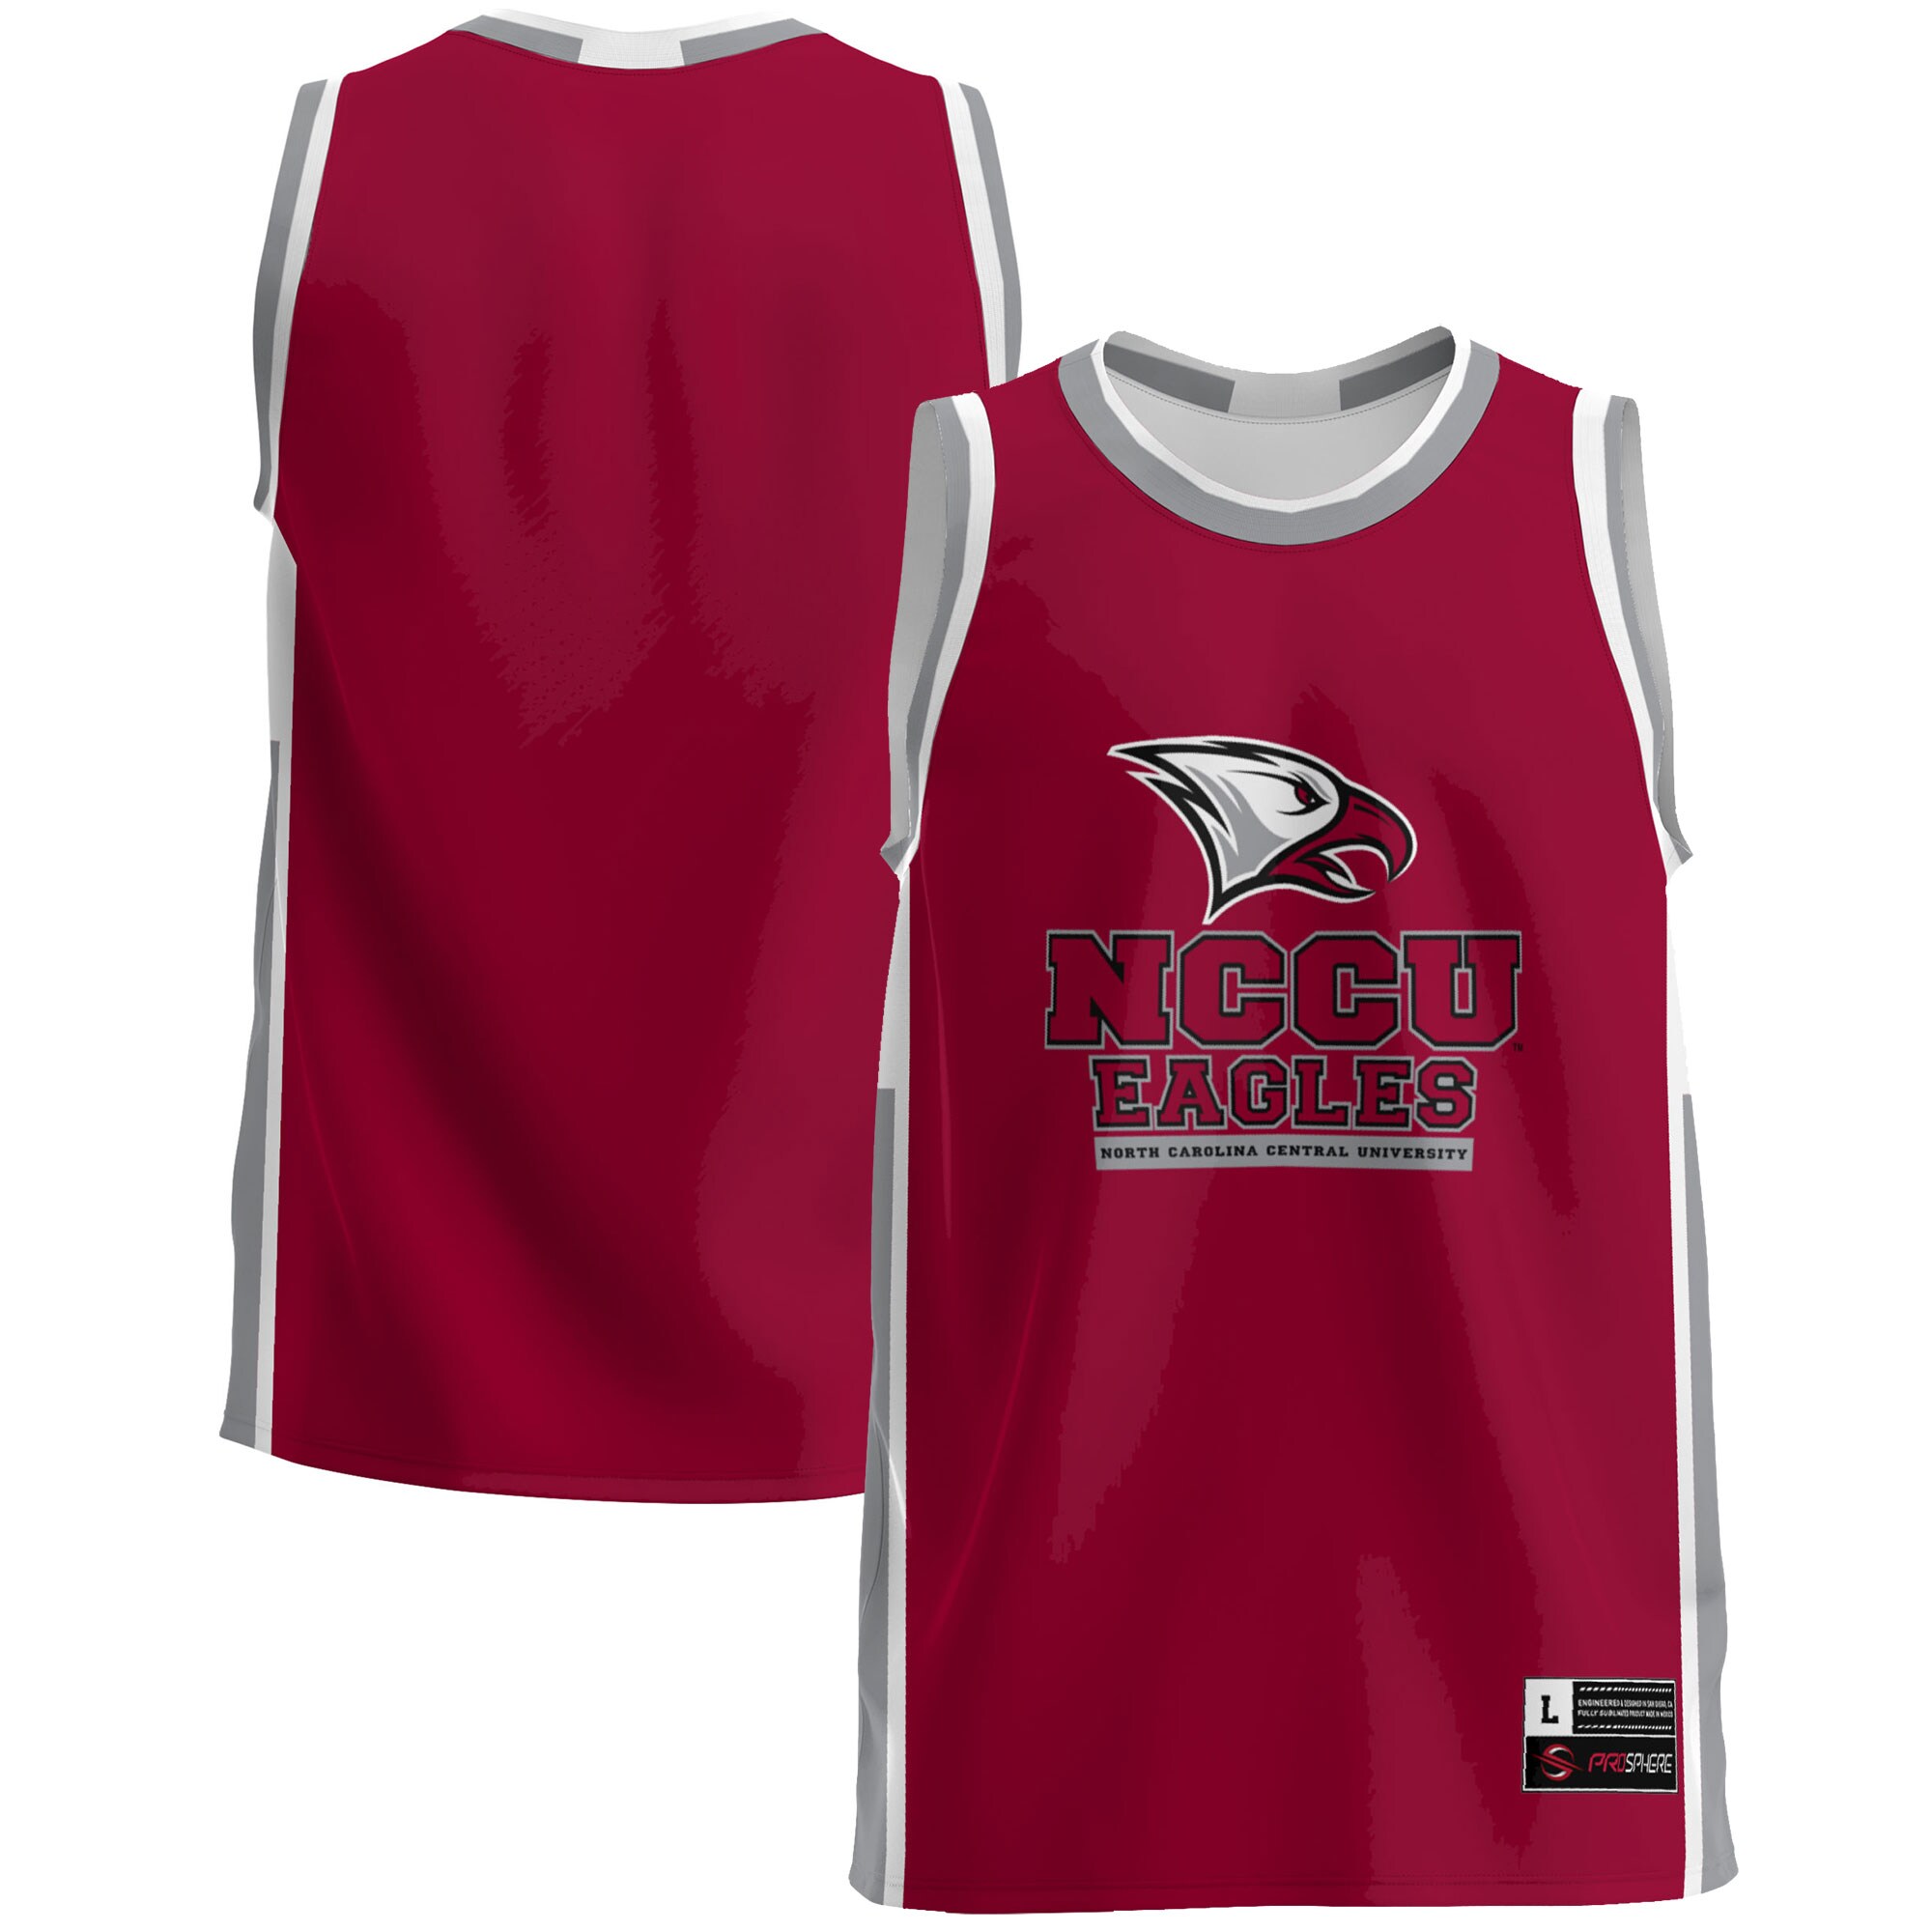 North Carolina Central Eagles Basketball Jersey - Maroon For Youth Women Men